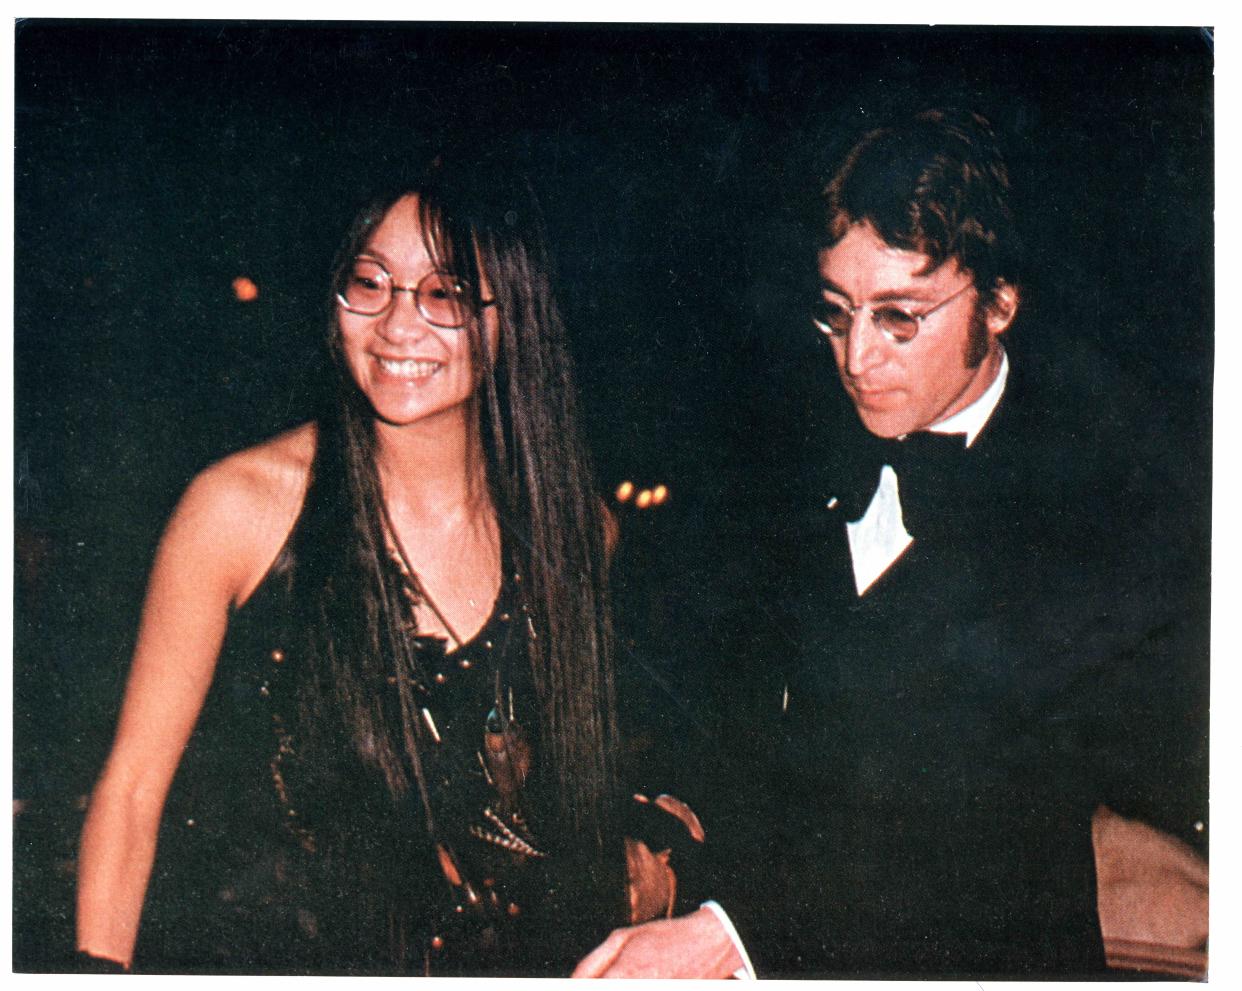 May Pang and John Lennon attend the 2nd Annual AFI Lifetime Achievement Awards honoring James Cagney at the Beverly Hilton Hotel. (Photo courtesy of May Pang)
